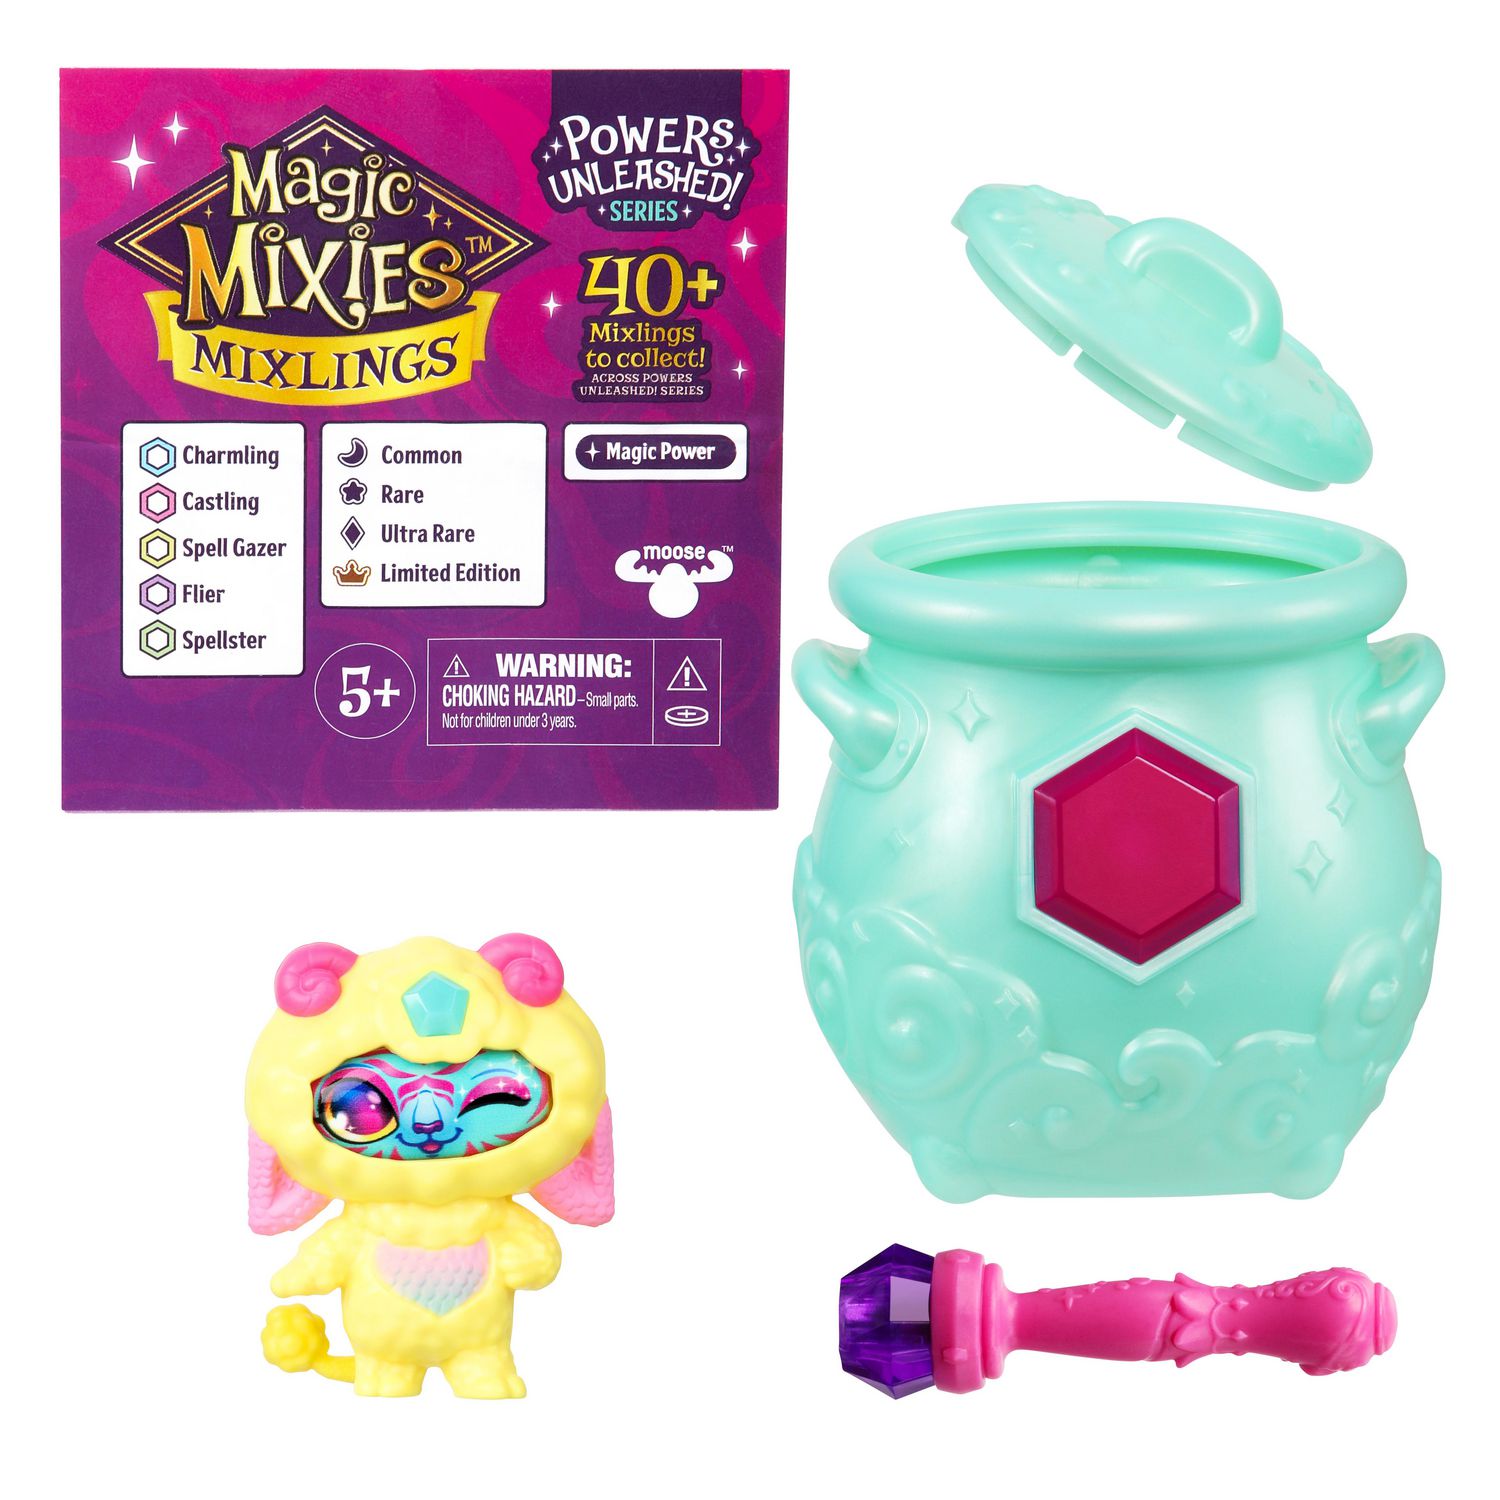 Magic Mixies Magical Gem Surprise Fire Magic Cauldron - Reveal a  Non-Electronic Mixie Plushie and Magic Ring with a pop up Reveal from The  Fizzing